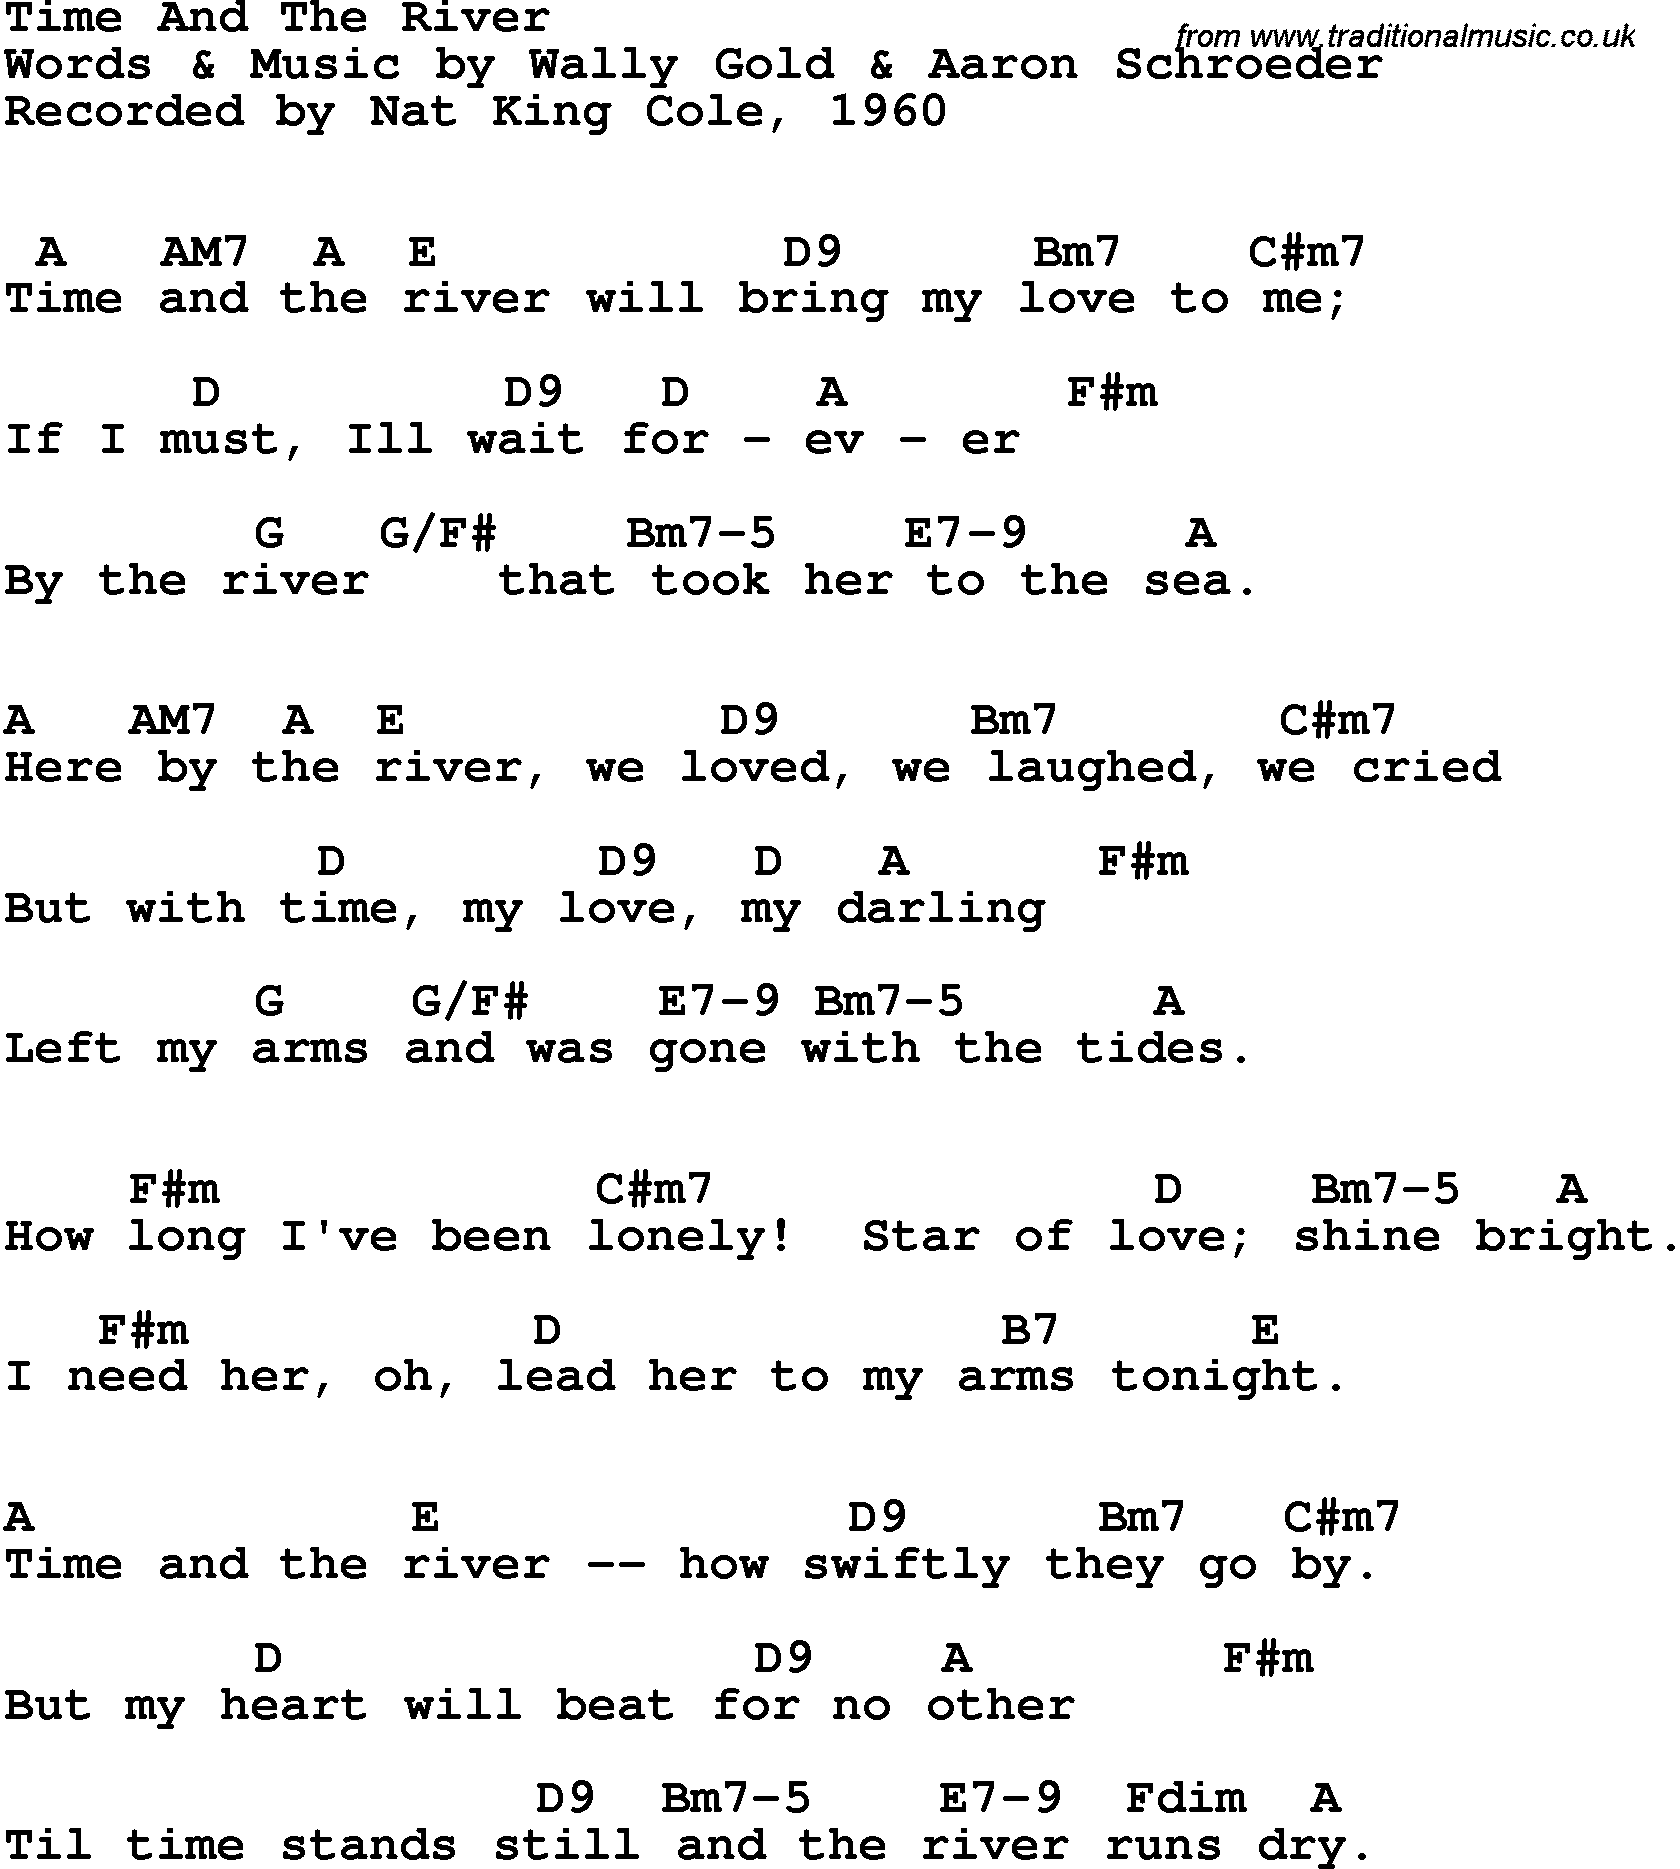 Song Lyrics with guitar chords for Time And The River - Nat King Cole, 1960